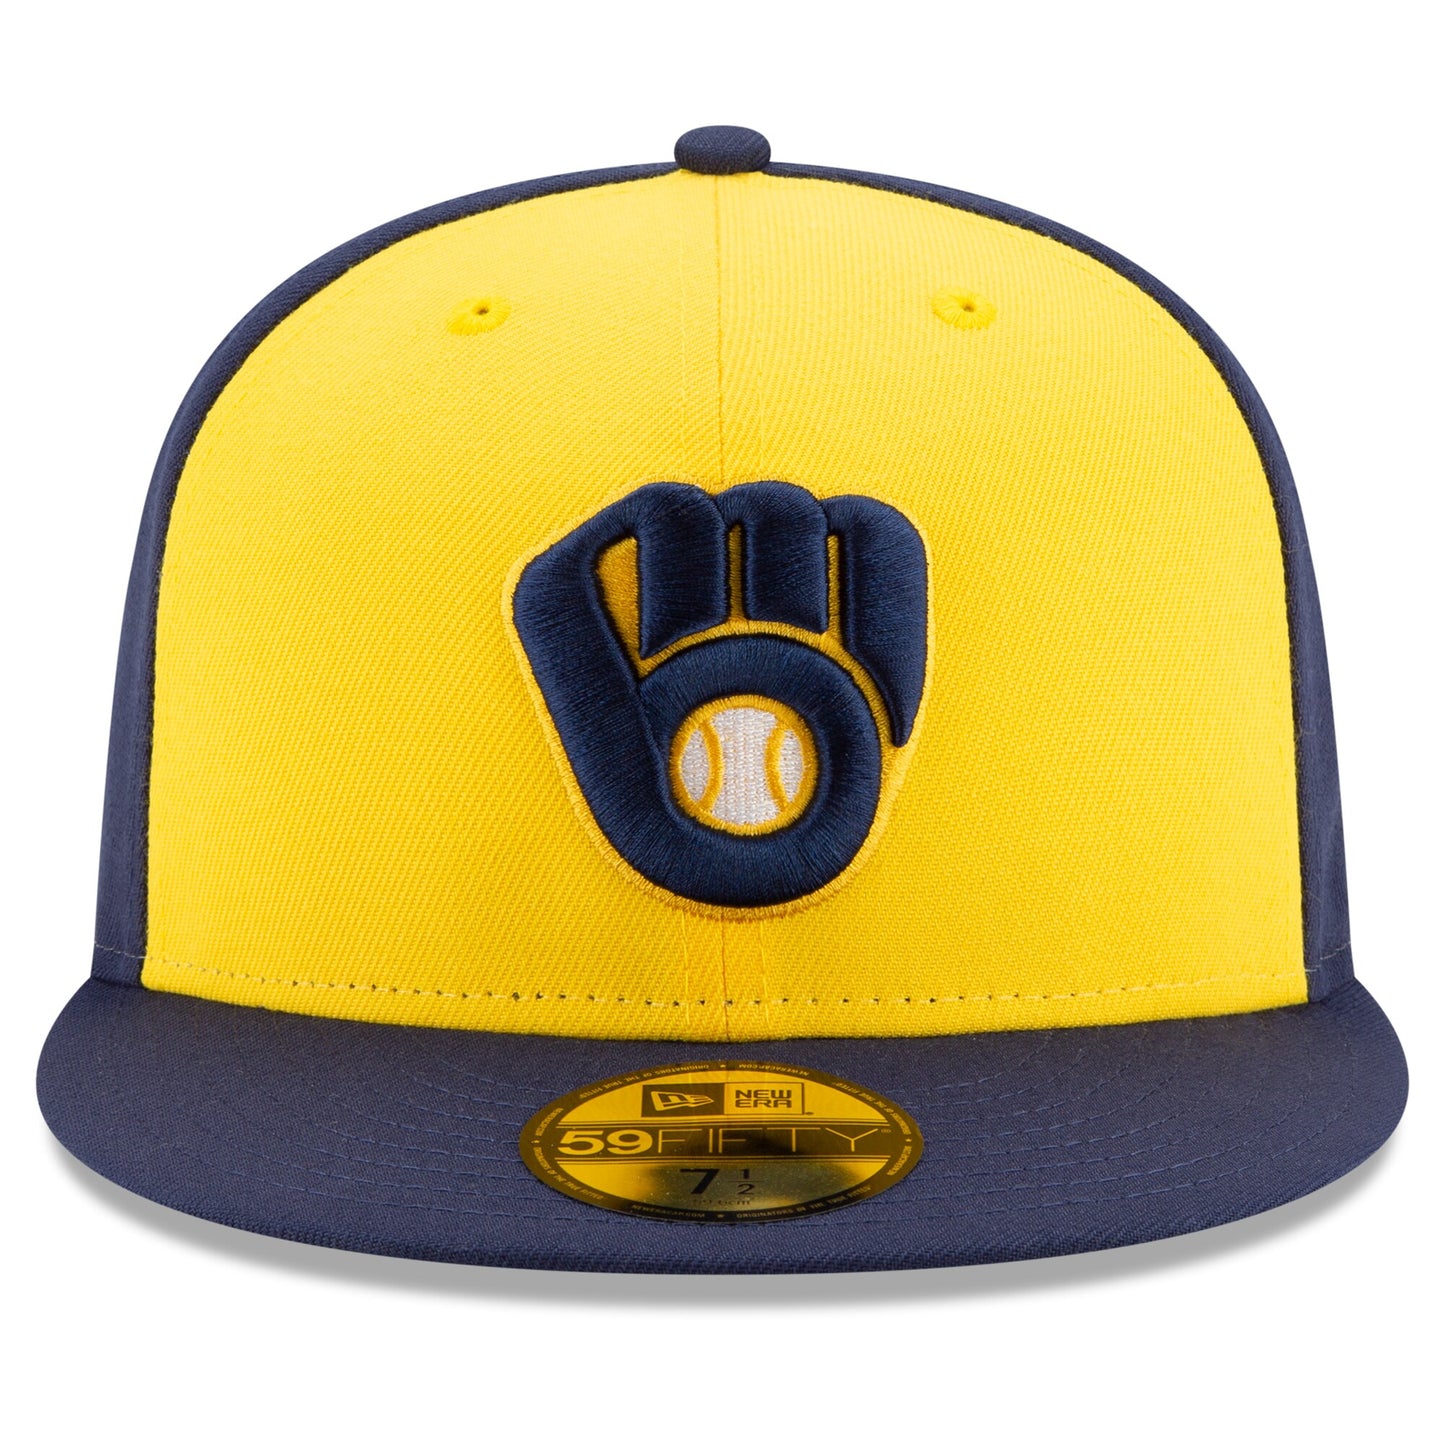 Men's Milwaukee Brewers New Era Navy/Yellow Alternate Authentic Collection On-Field 59FIFTY Fitted Hat